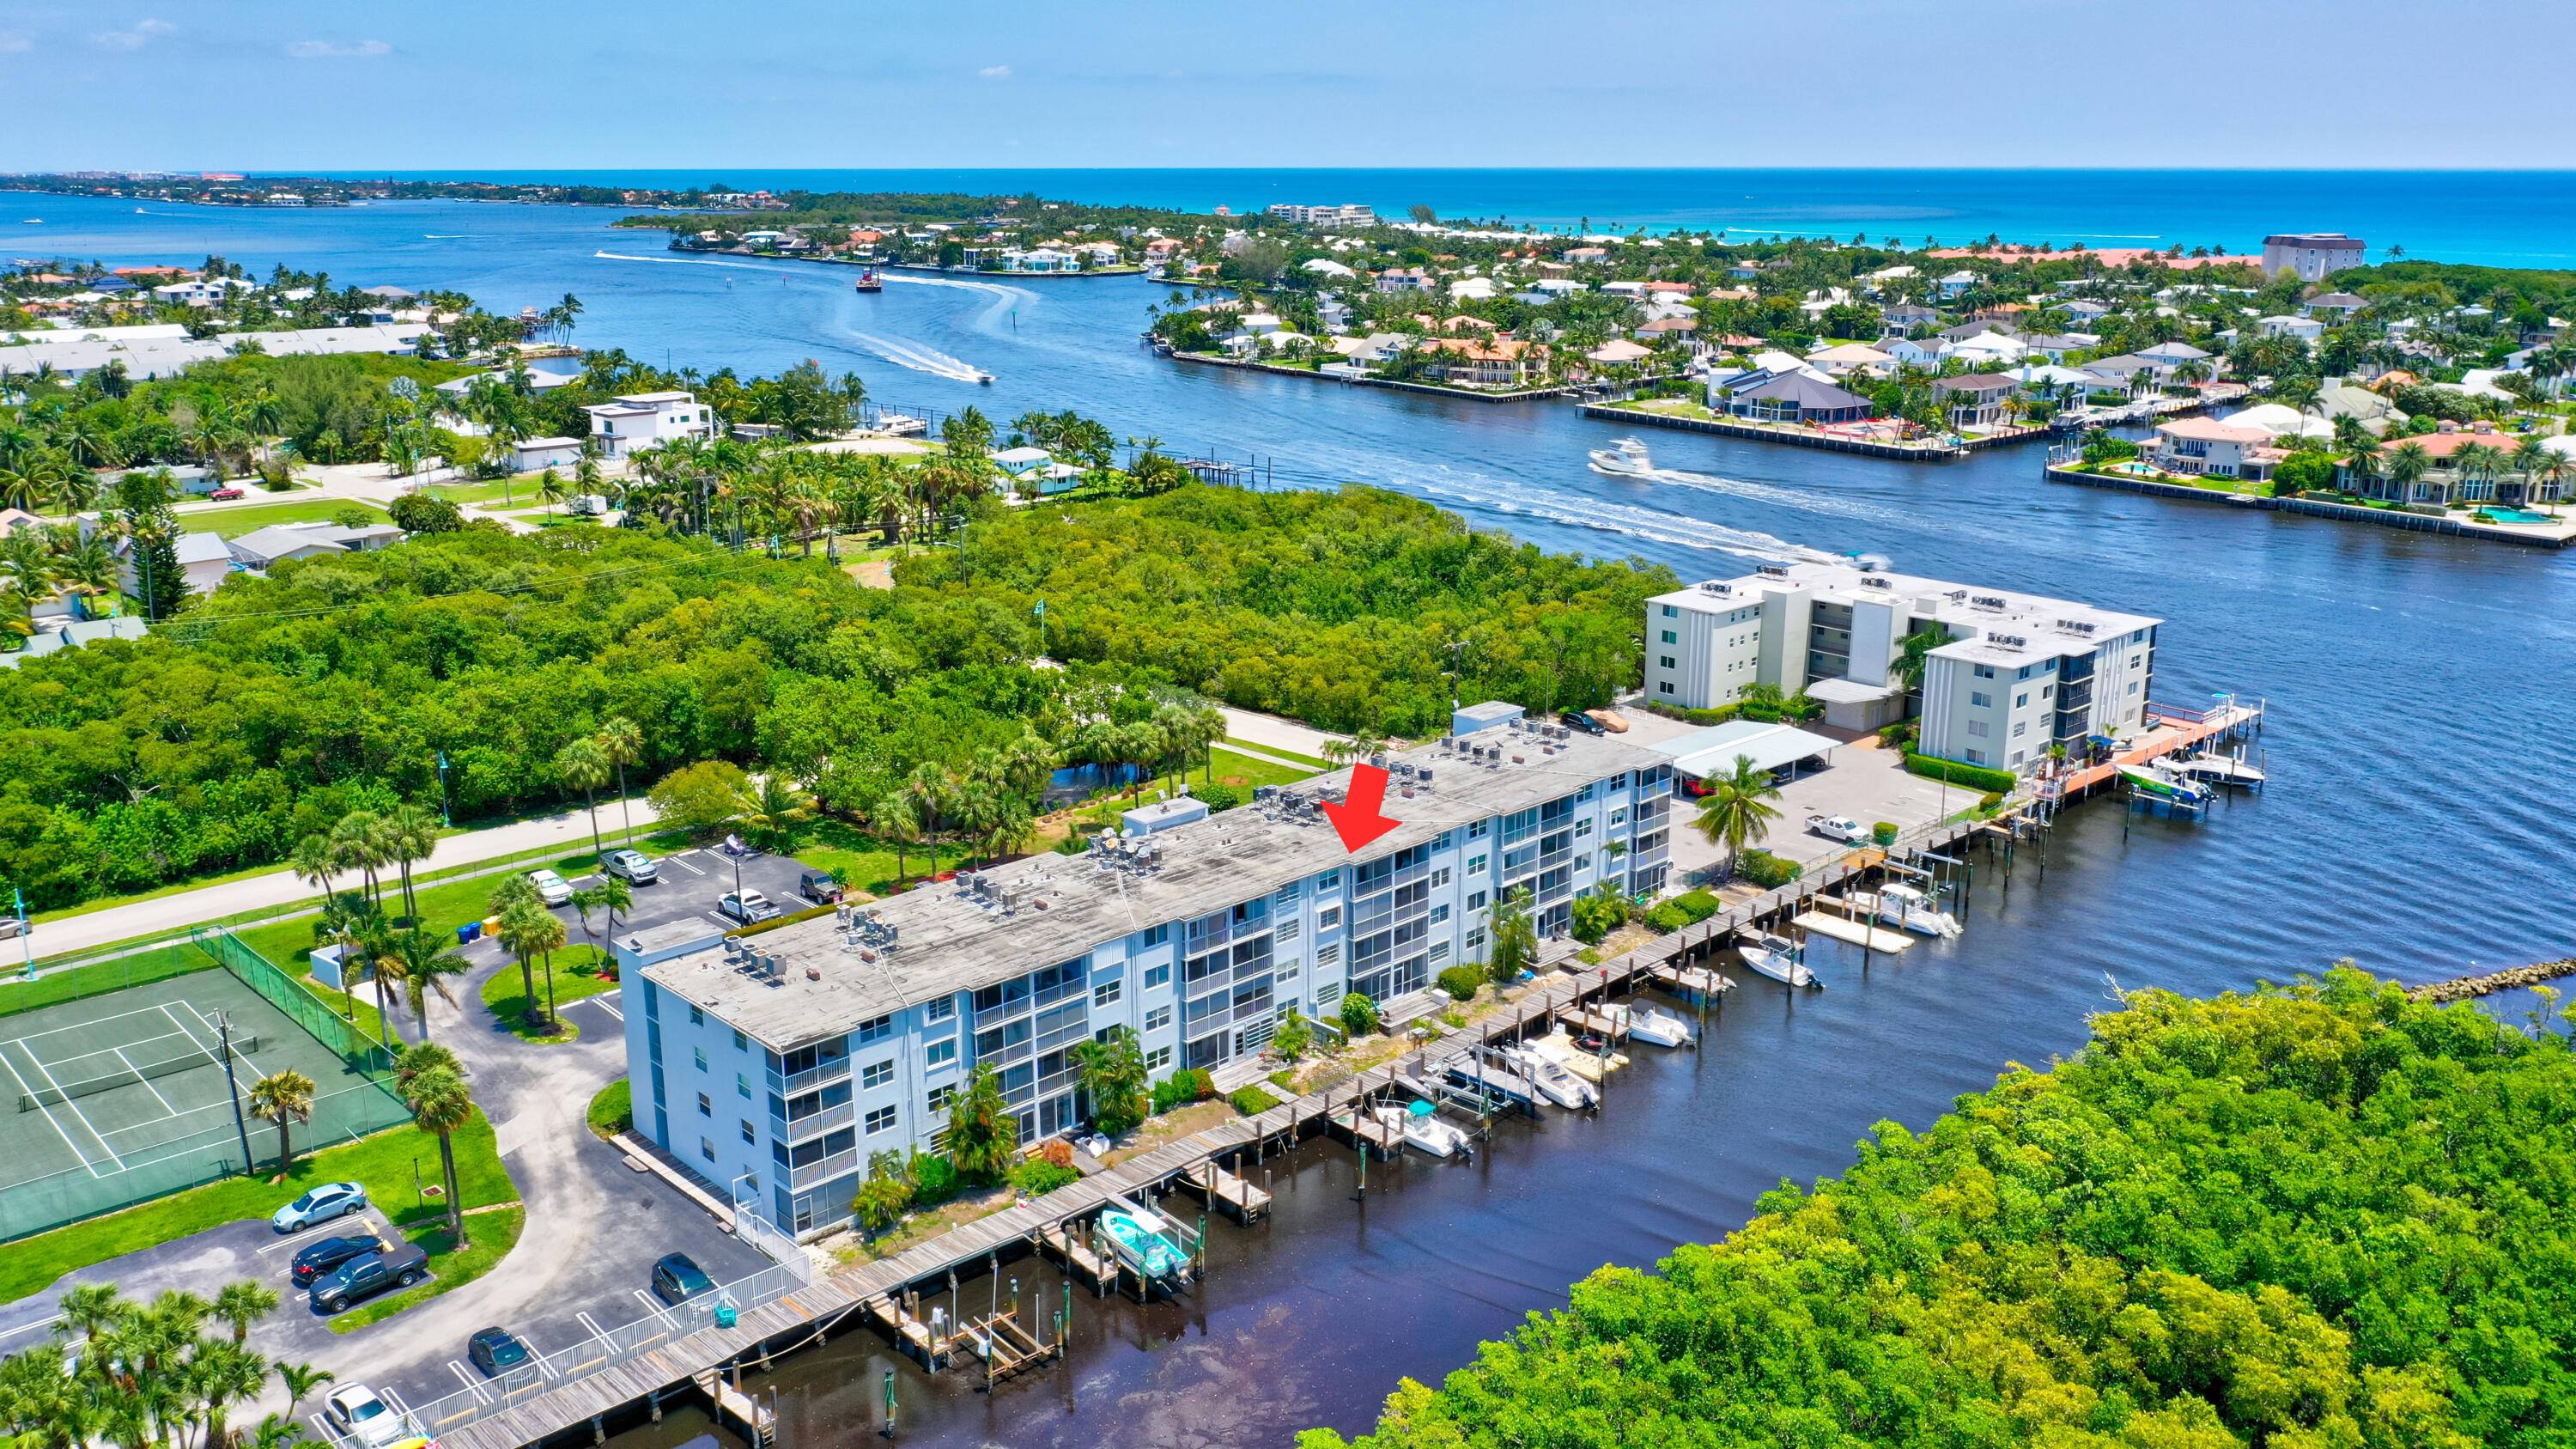 Welcome to this amazing first floor condo with great intracoastal views.